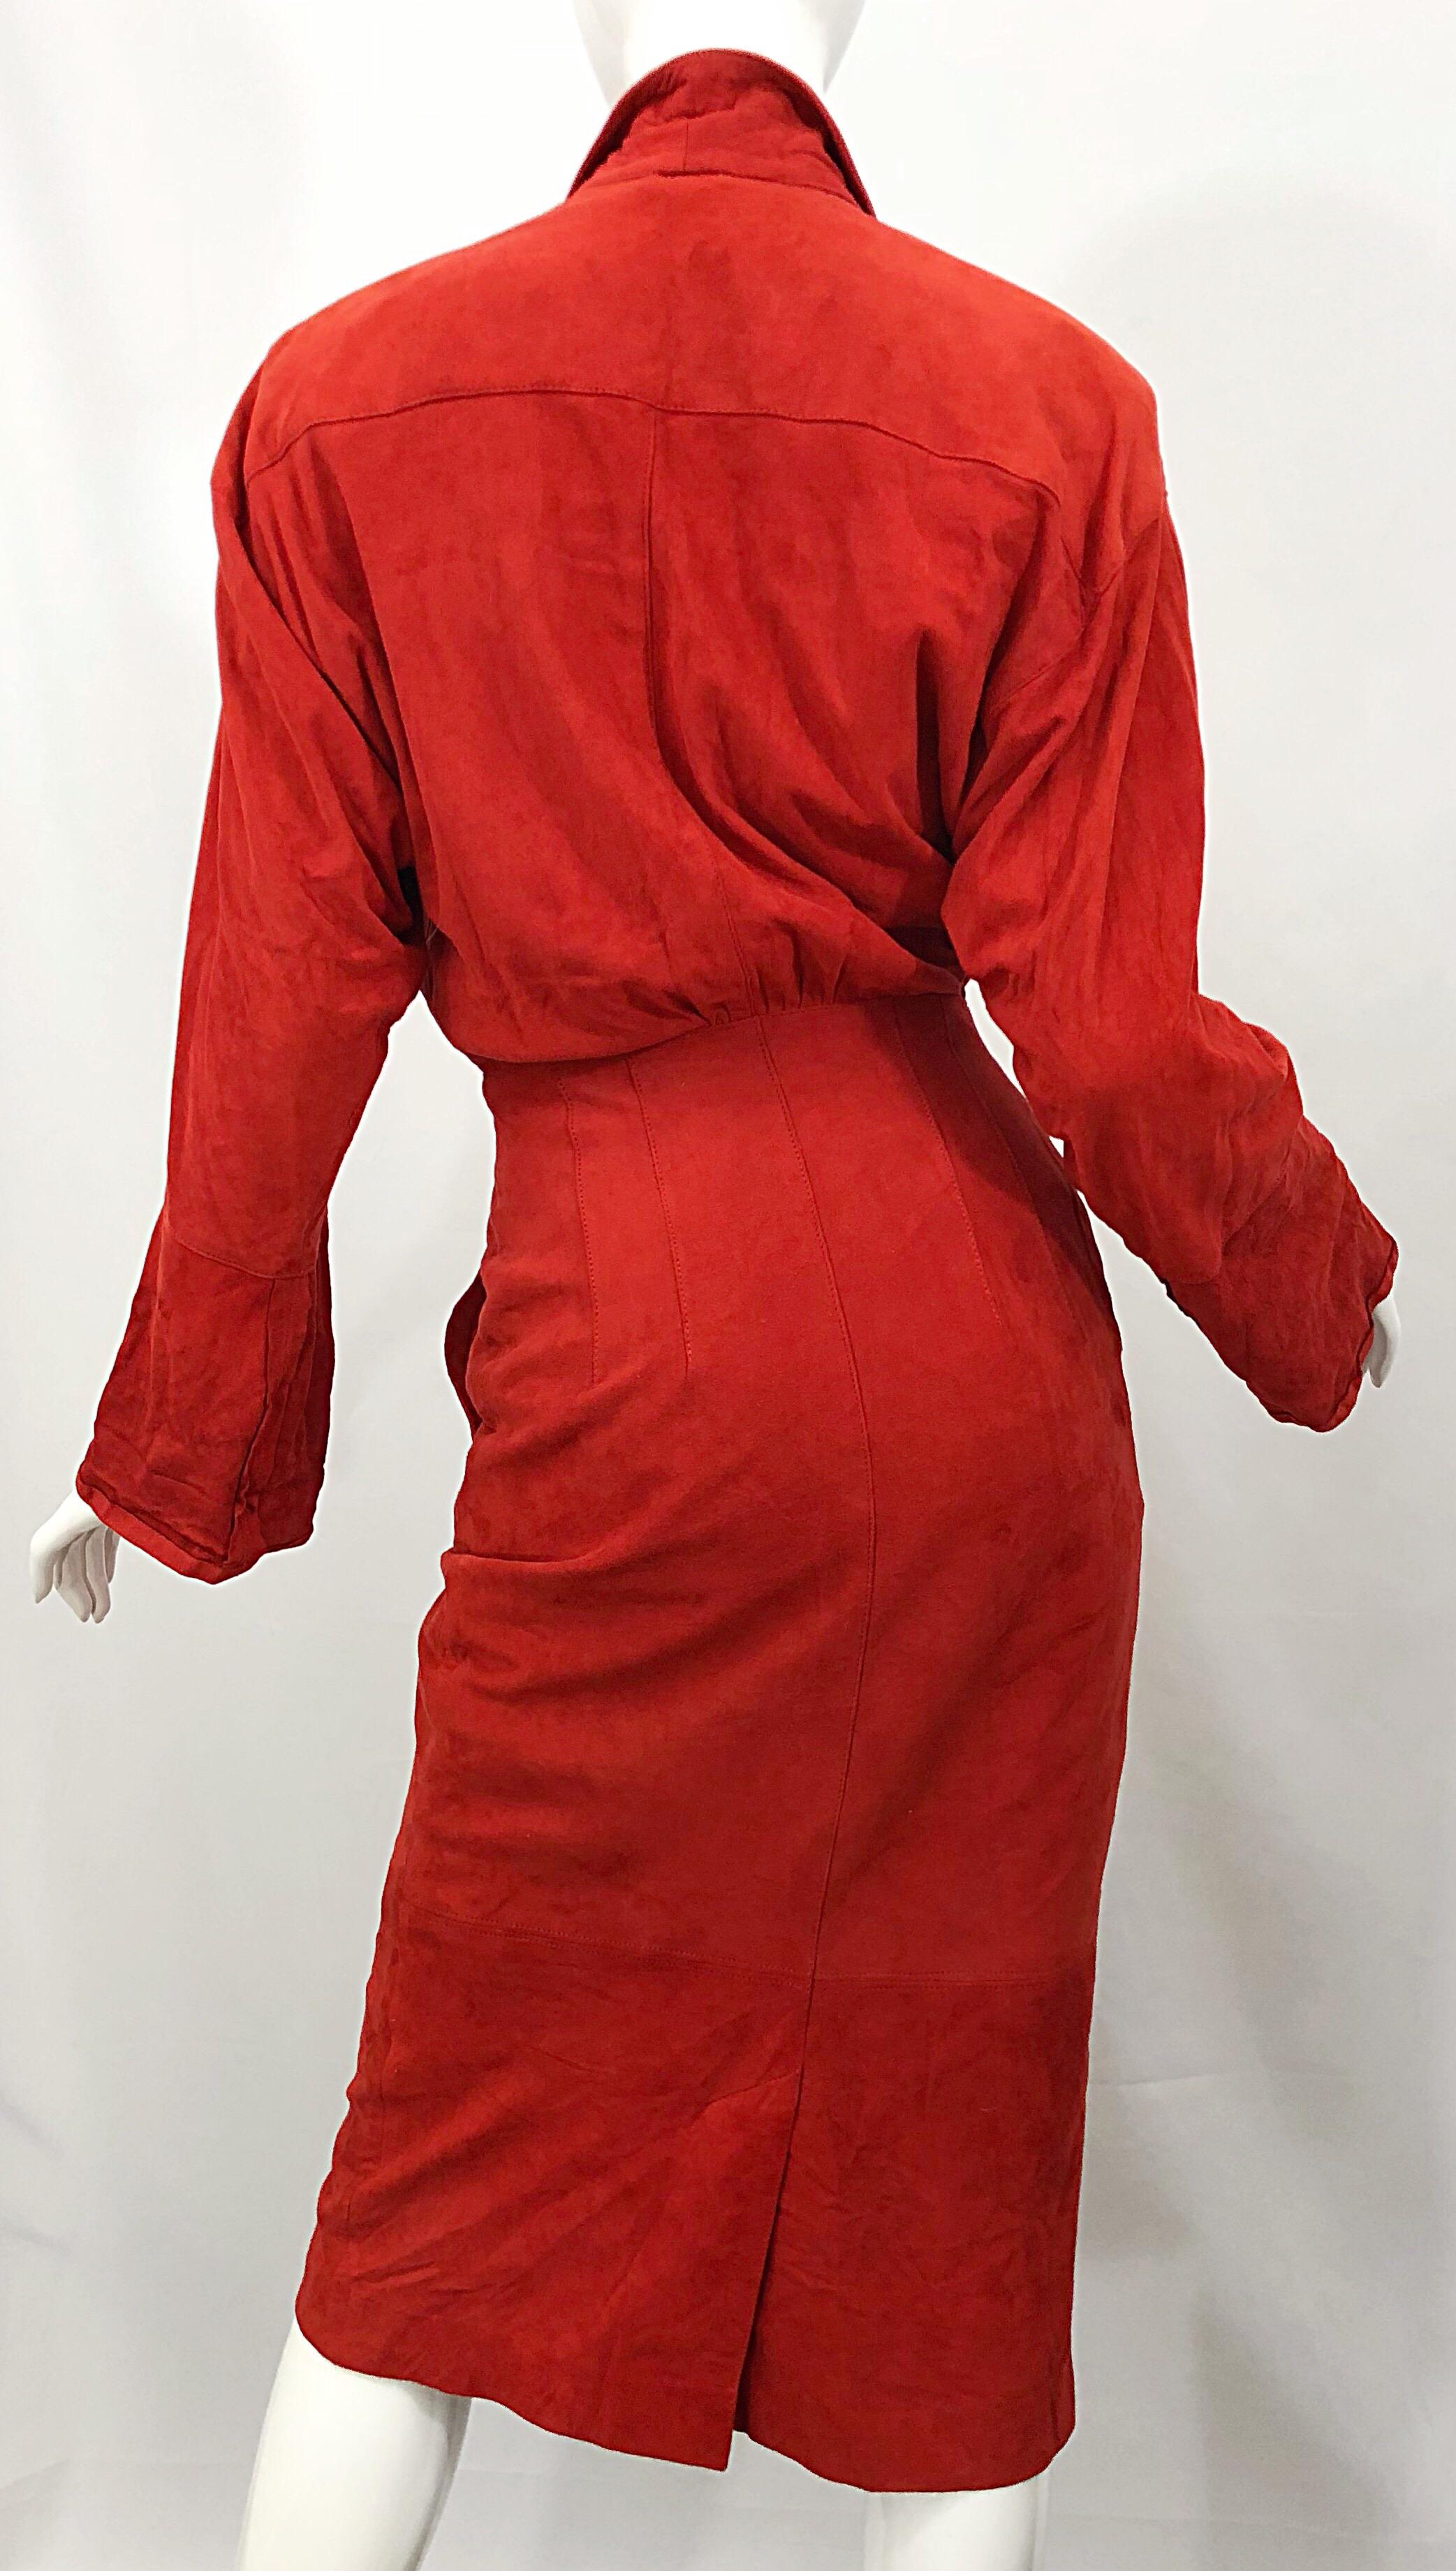 Chic 1990s Red Rust Suede Leather Size 4 / 6 Long Sleeve Vintage 90s Shirt Dress 5